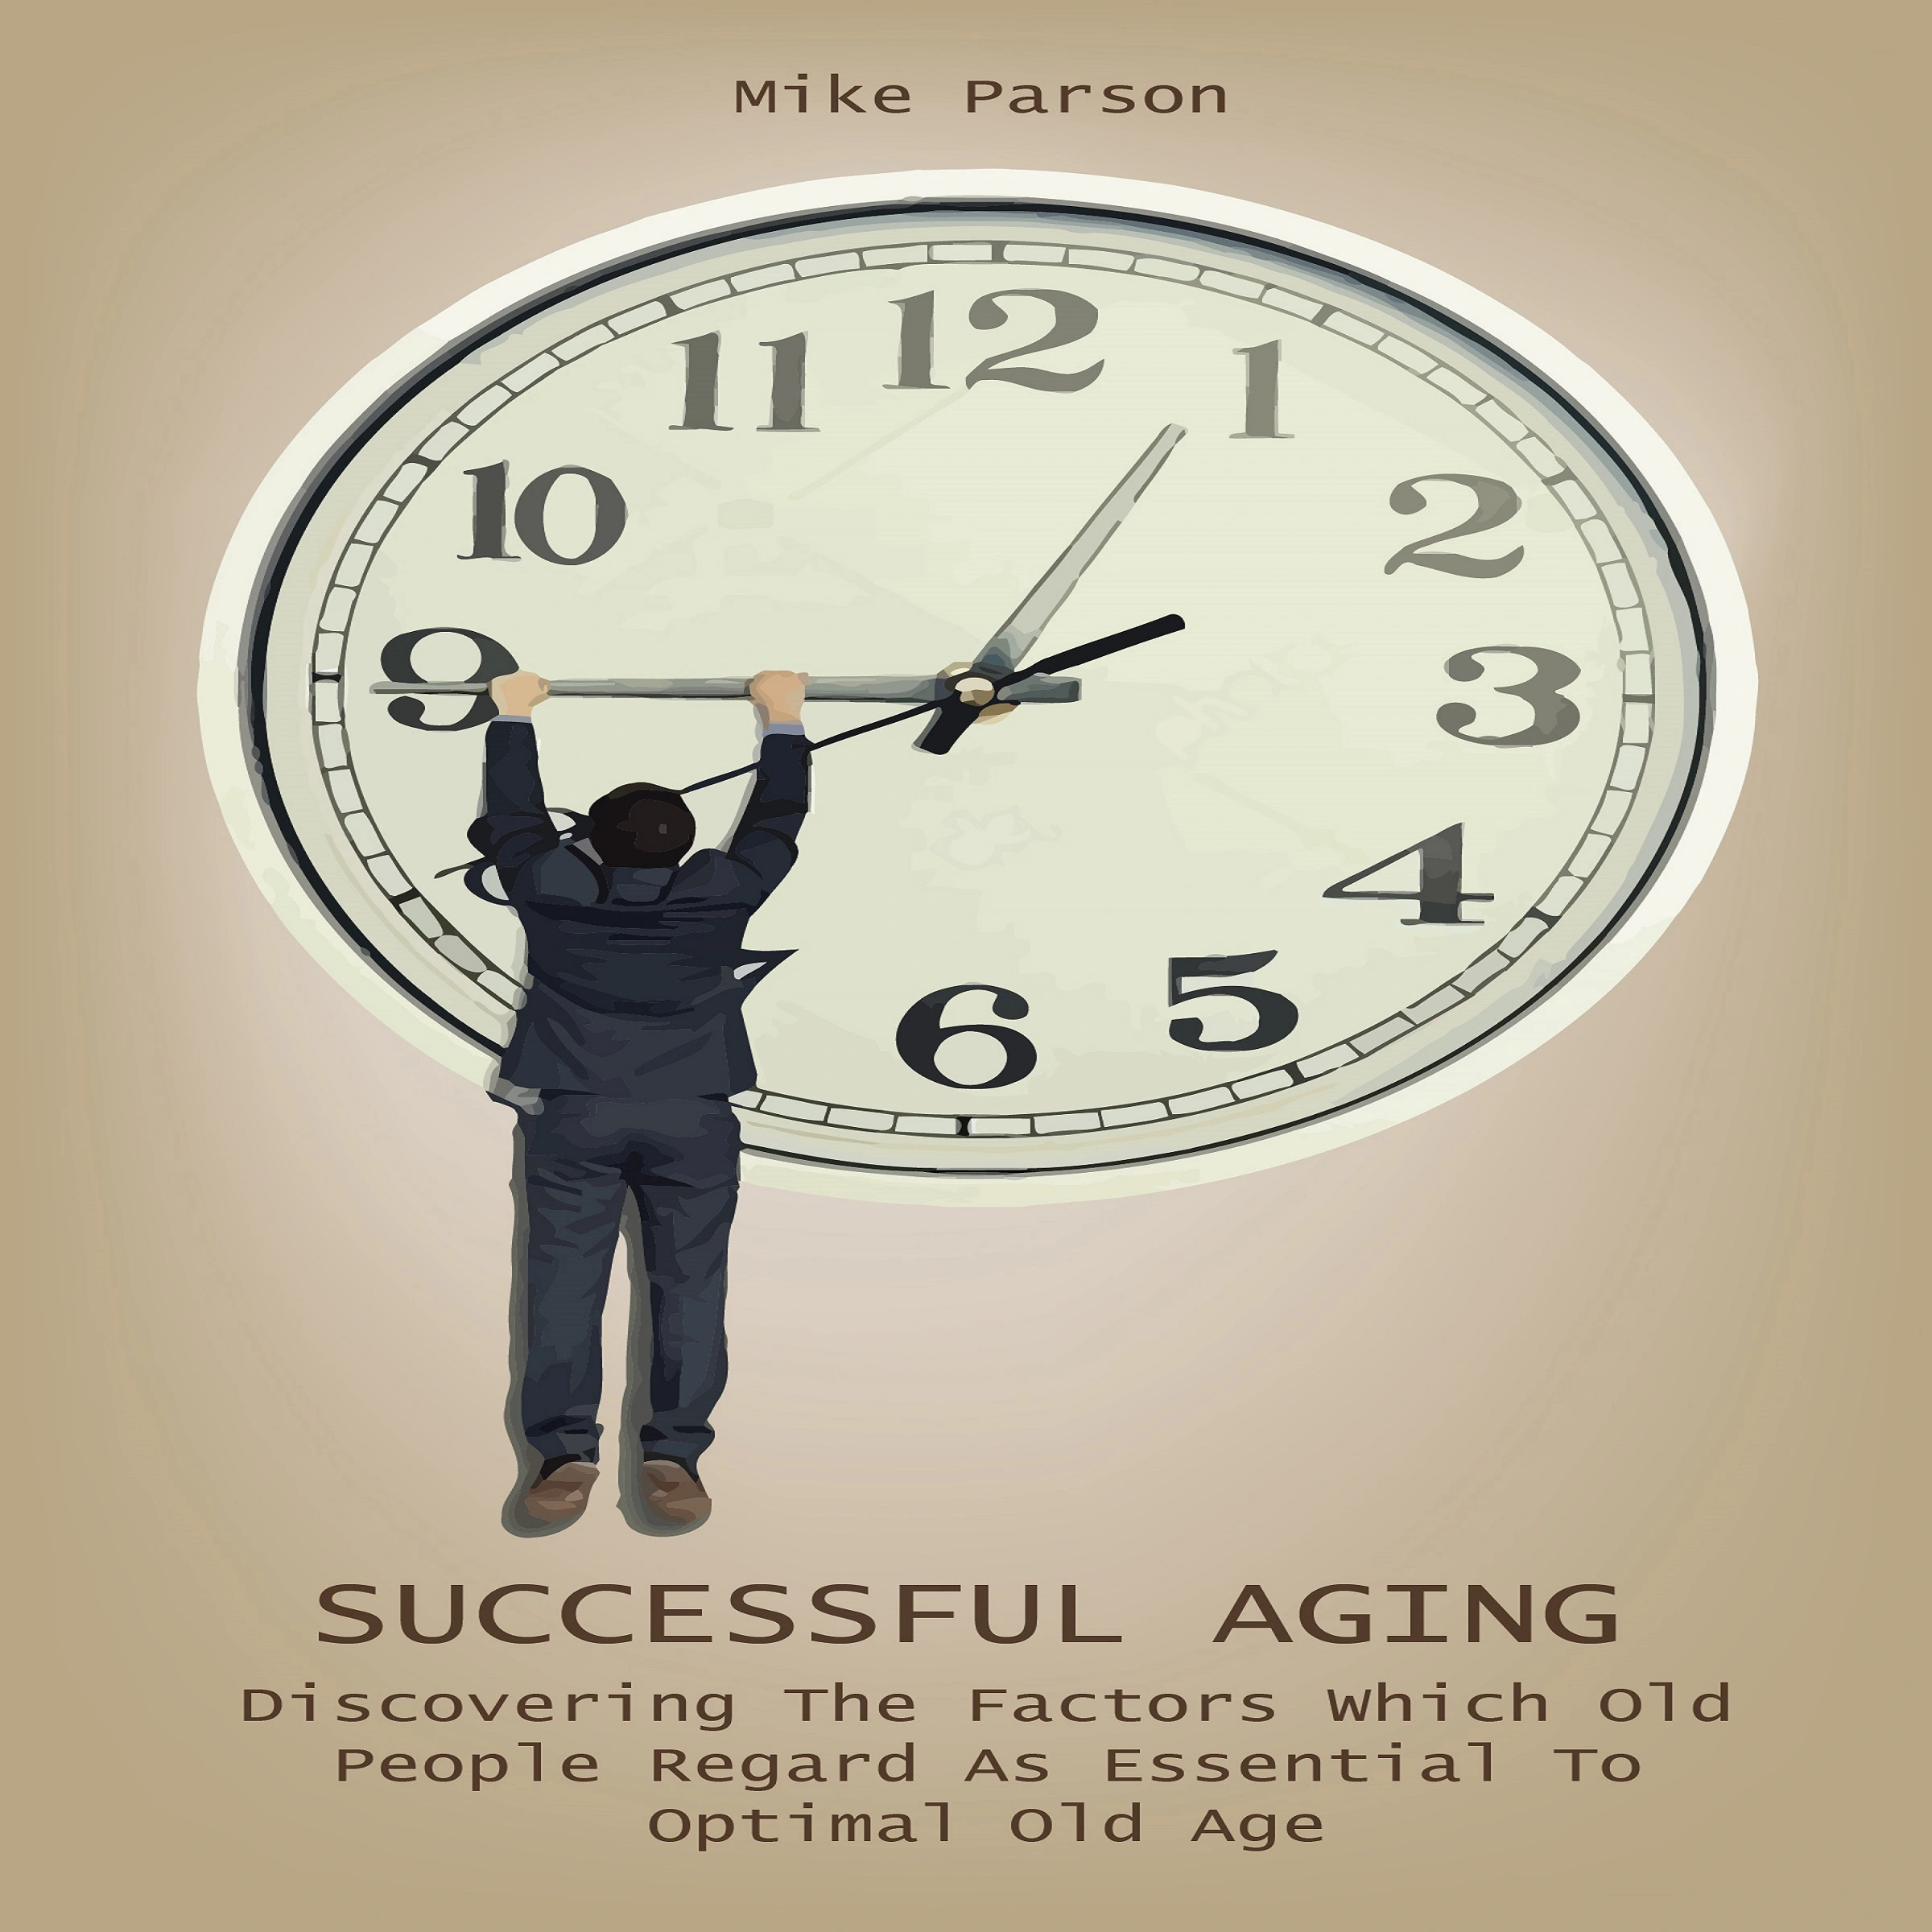 Successful Aging Audiobook by Mike Parson